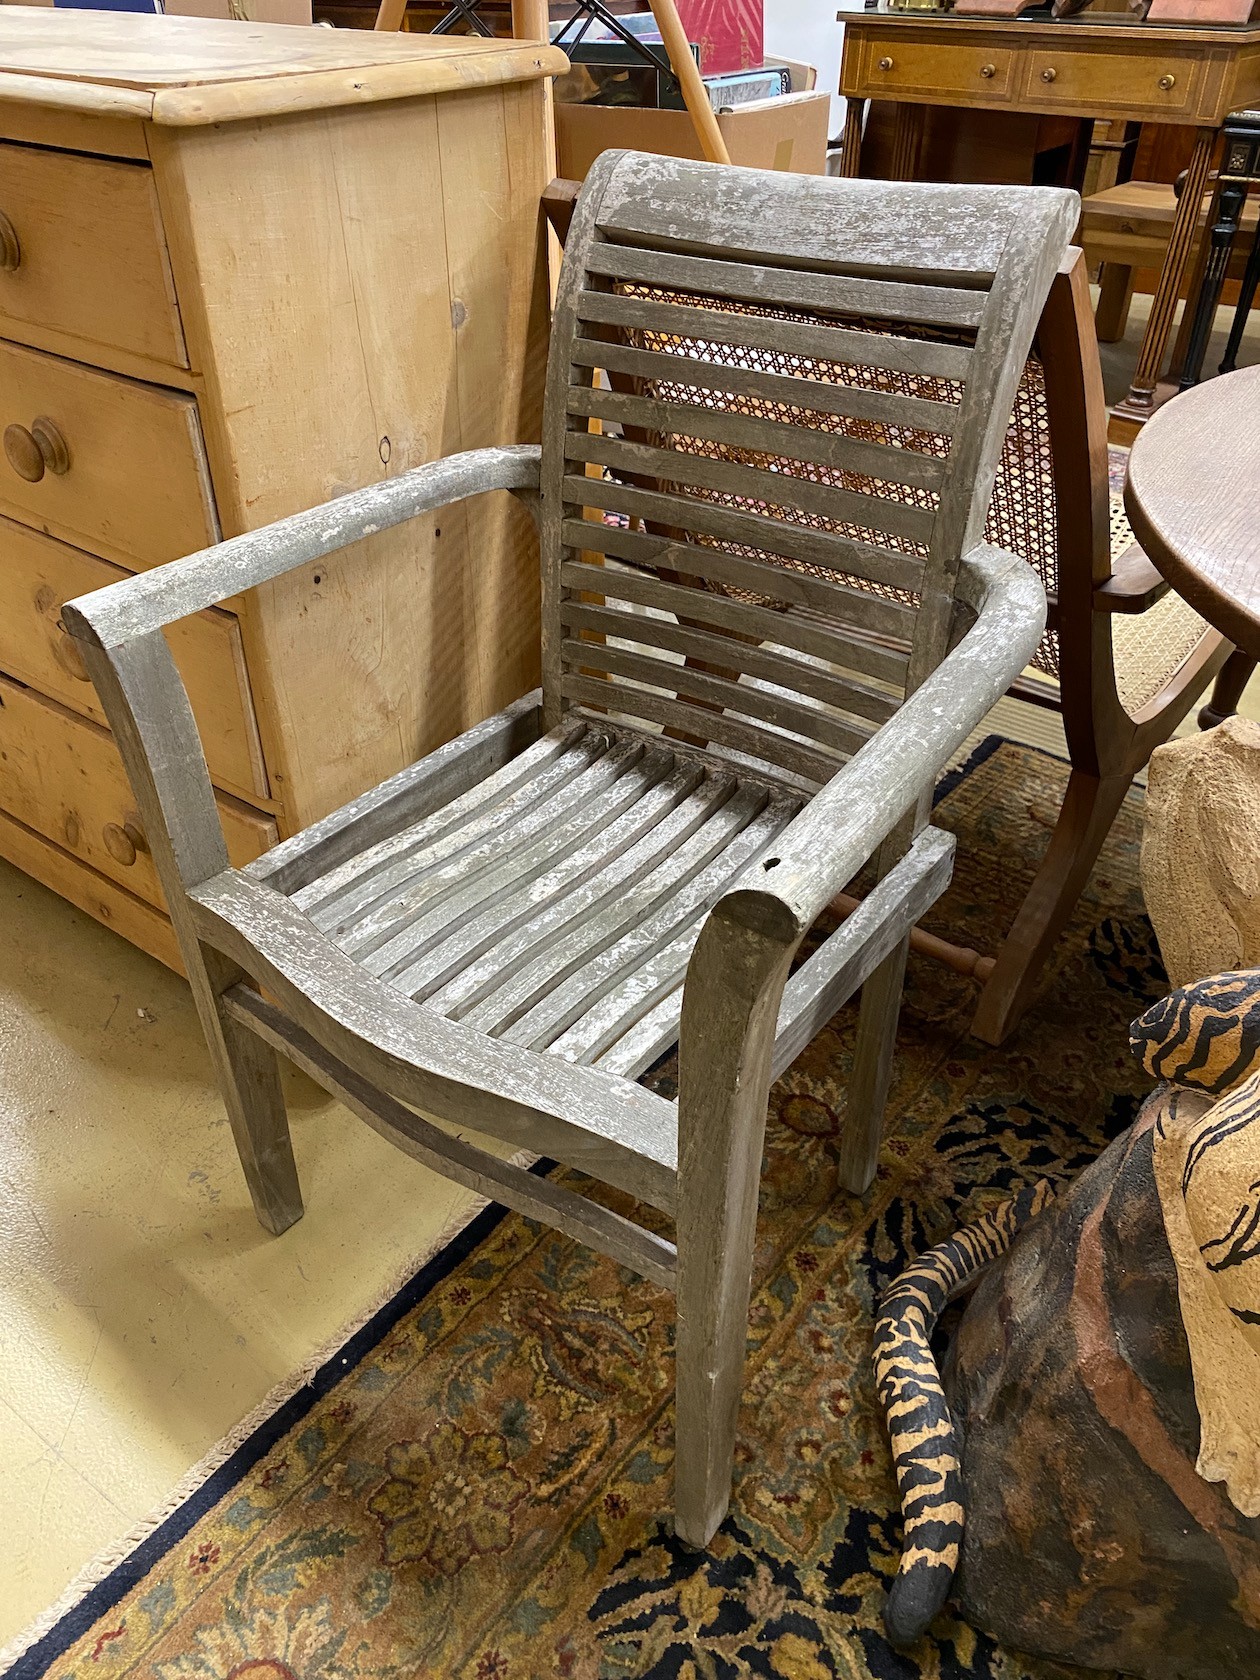 A pair of weathered teak slatted garden elbow chairs, width 65cm, depth 45cm, height 95cm